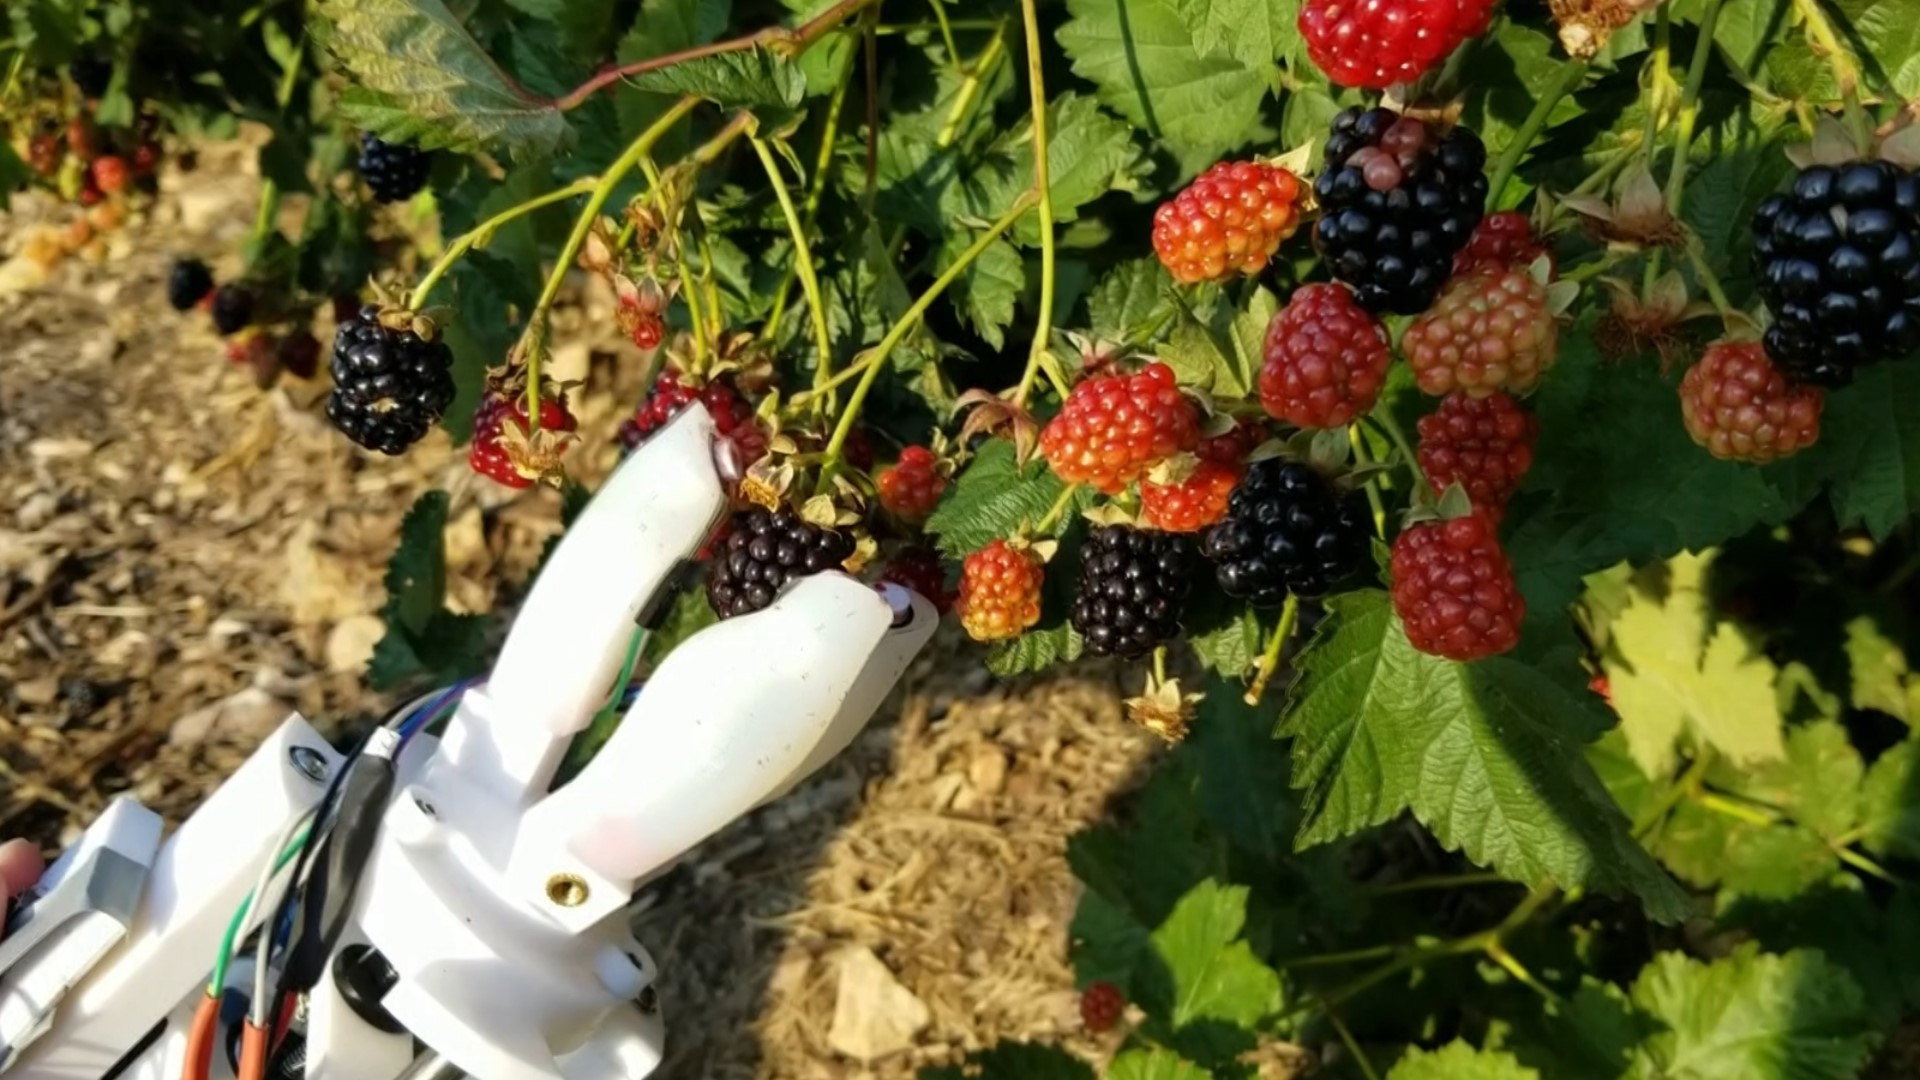 Food and engineering scientists at the University of Arkansas and Georgia Tech are working together to create a blackberry-picking robot.